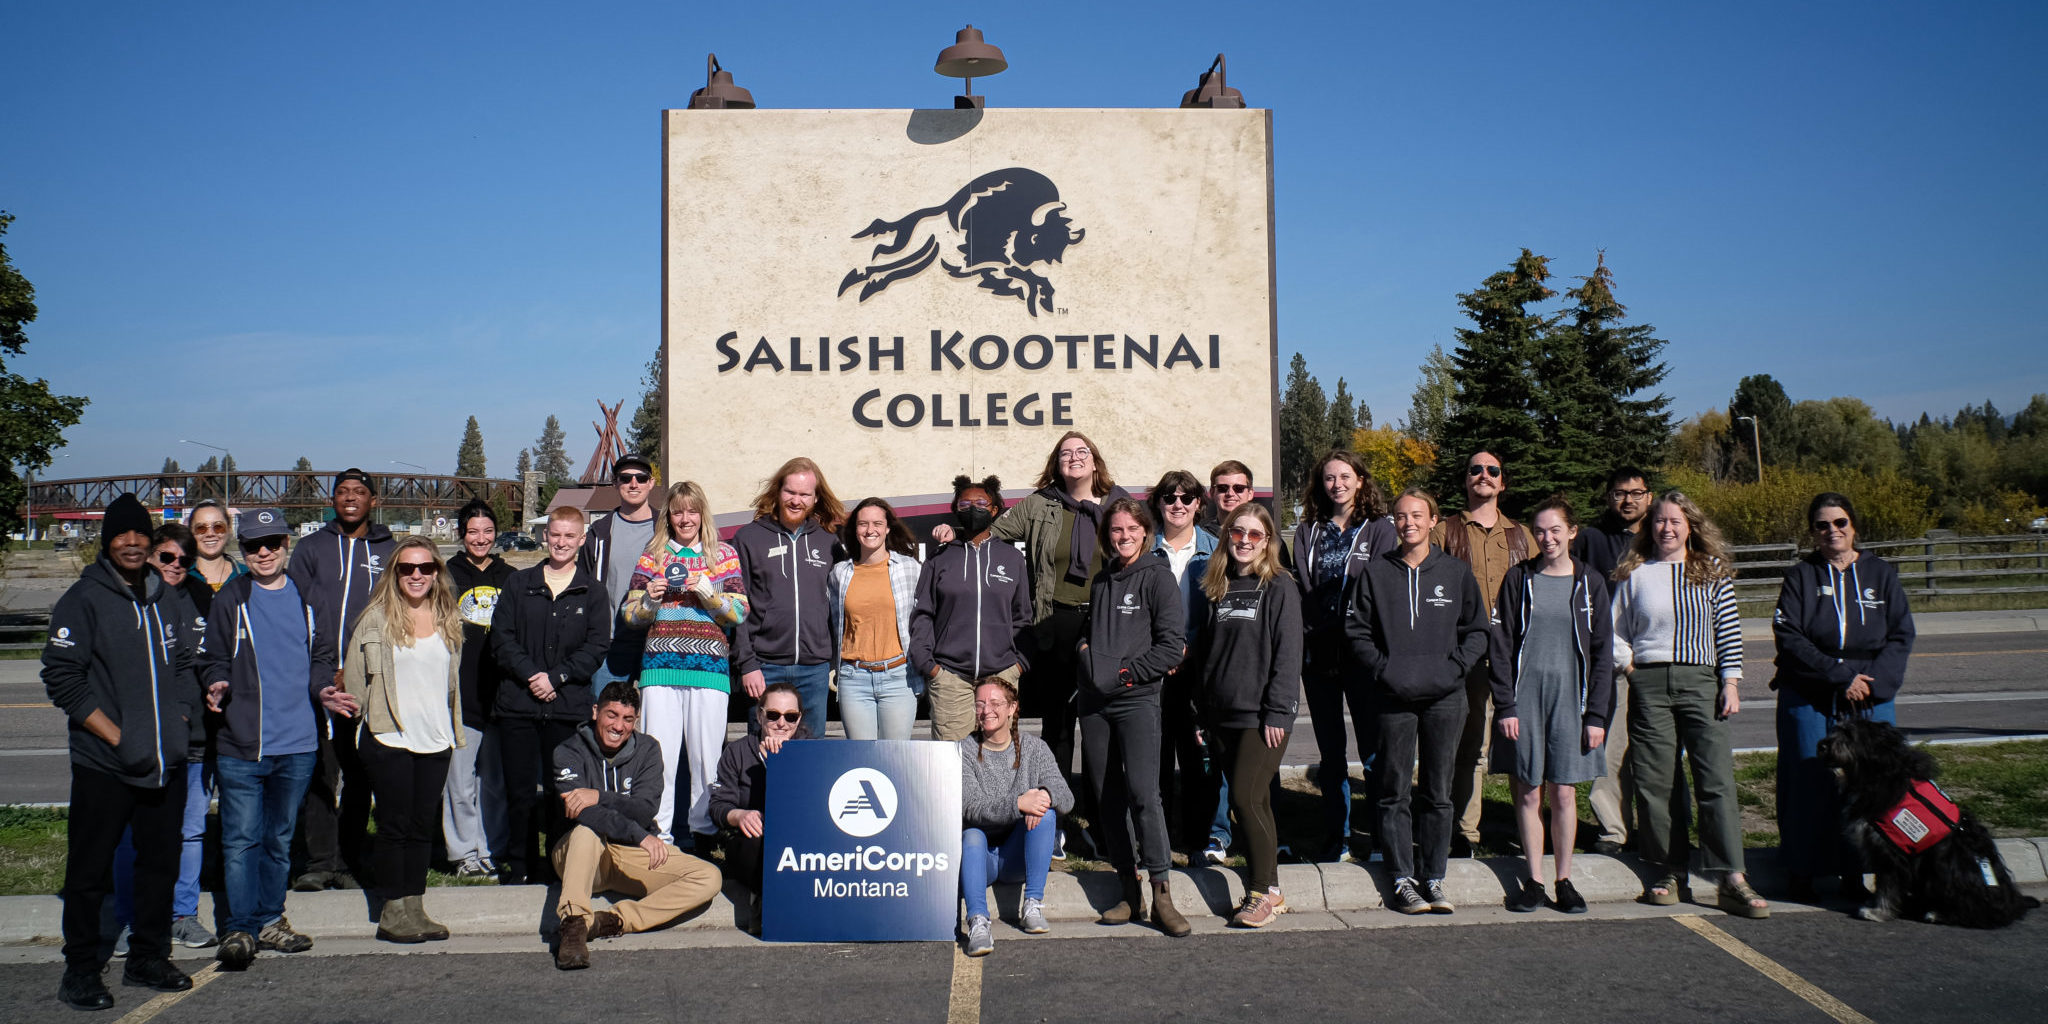 Group photo af about 40 AmeriCorps members and MTCC staff. They are holding a sign with the AmeriCorps logo, and there is a large sign that says "Salish Kootenai College" behind them. On the sign is a stylized image of a charging buffalo.